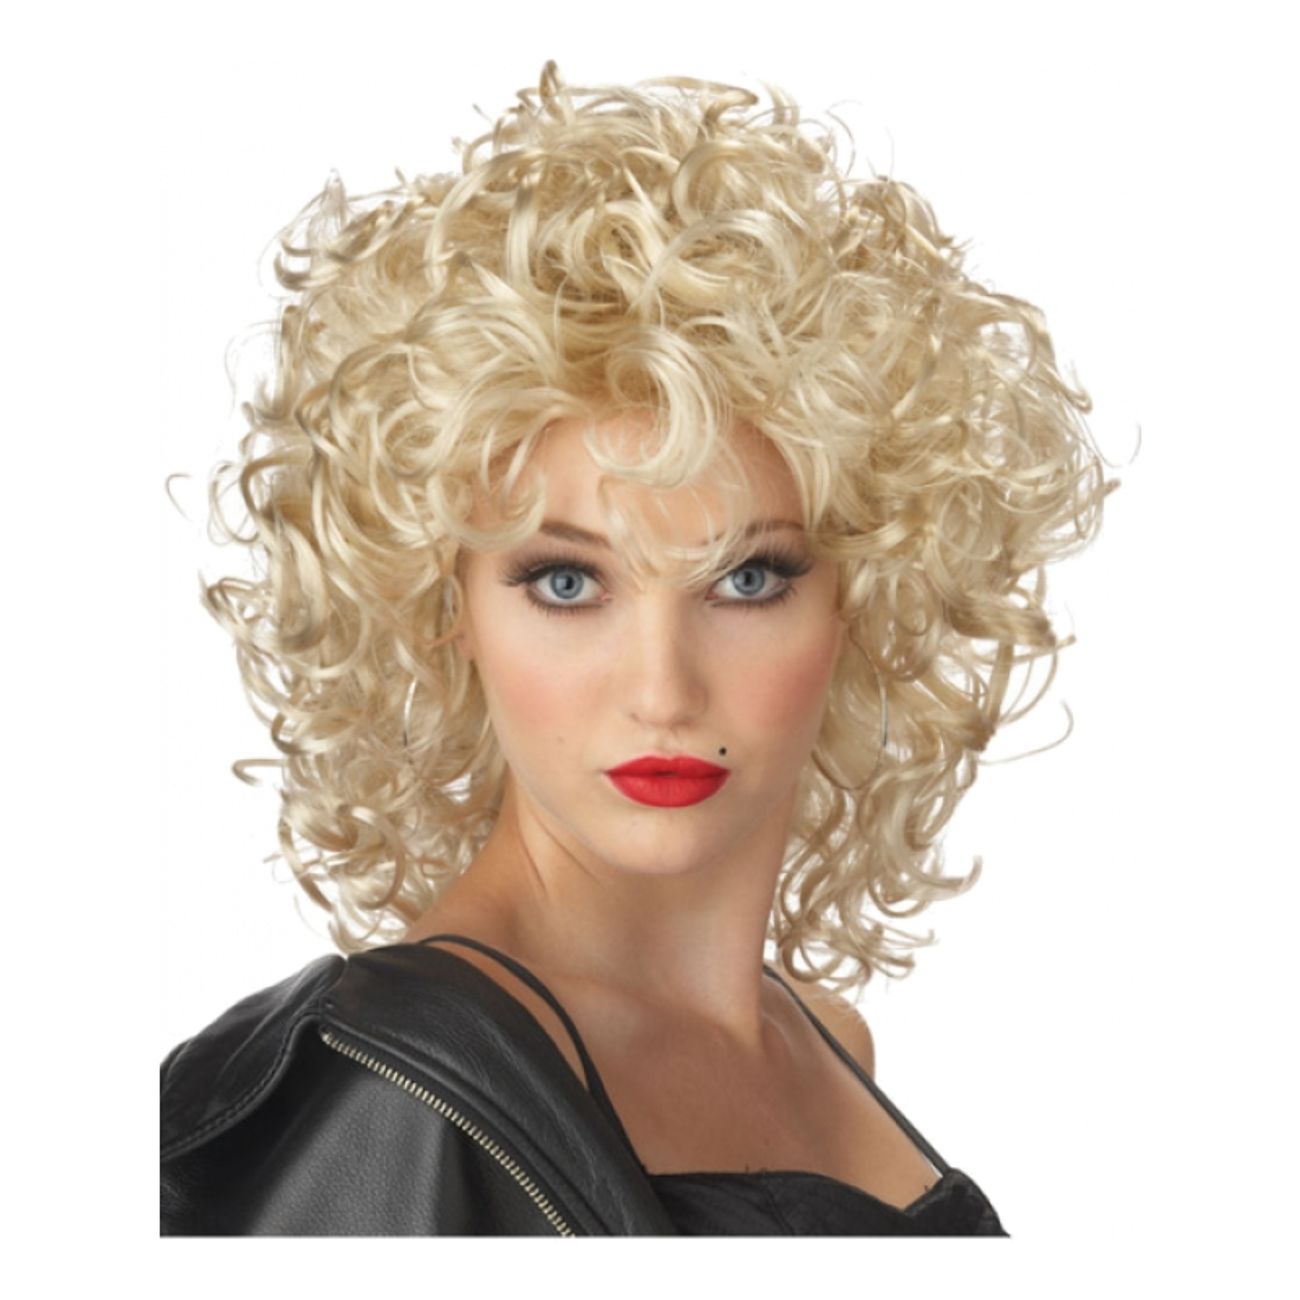 the-bad-girl-blonde-wig-1